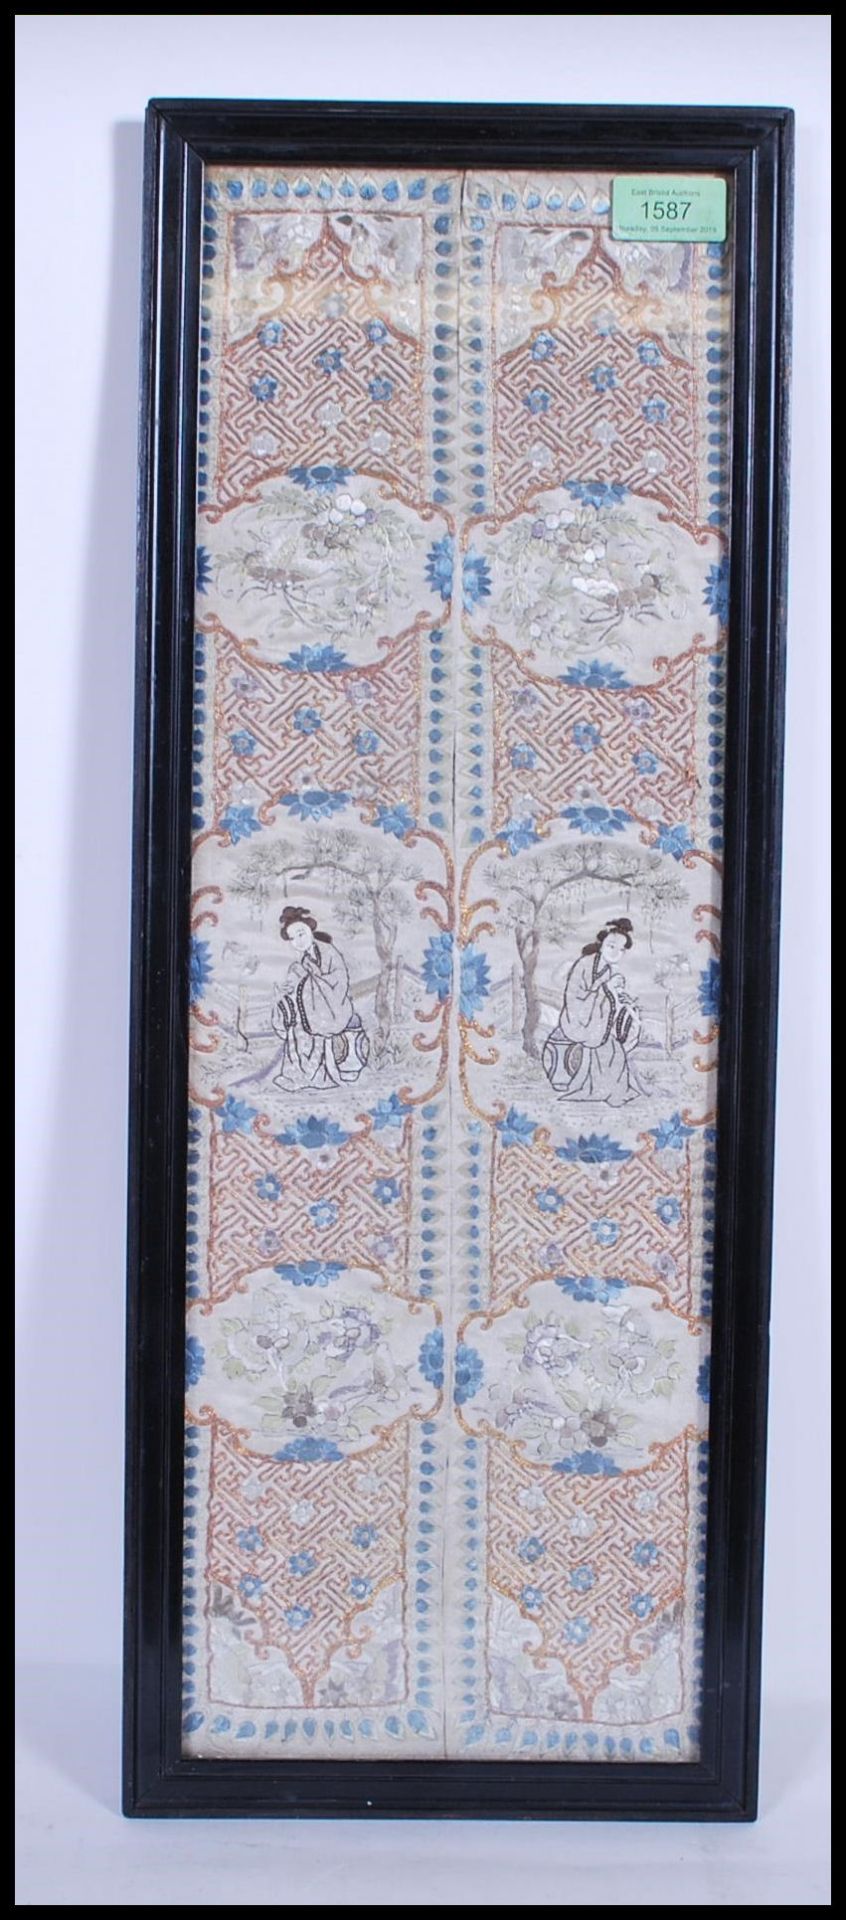 A late 19th Century early 20th Century Chinese embroidered silk sleeve depicting female figures in